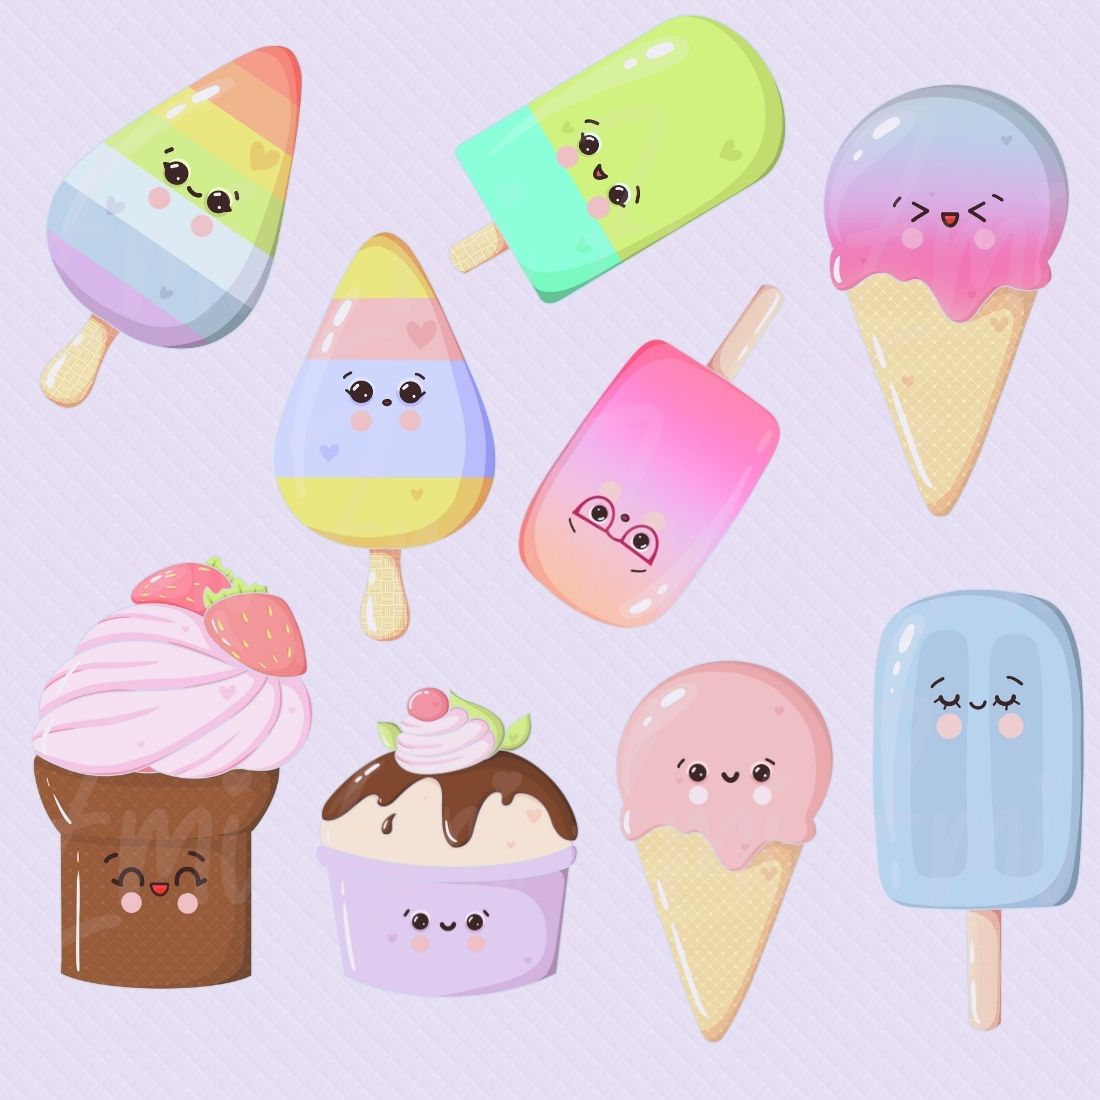 Included images of the different ice creams in kawaii style – 17 PNG files on transparent background. 